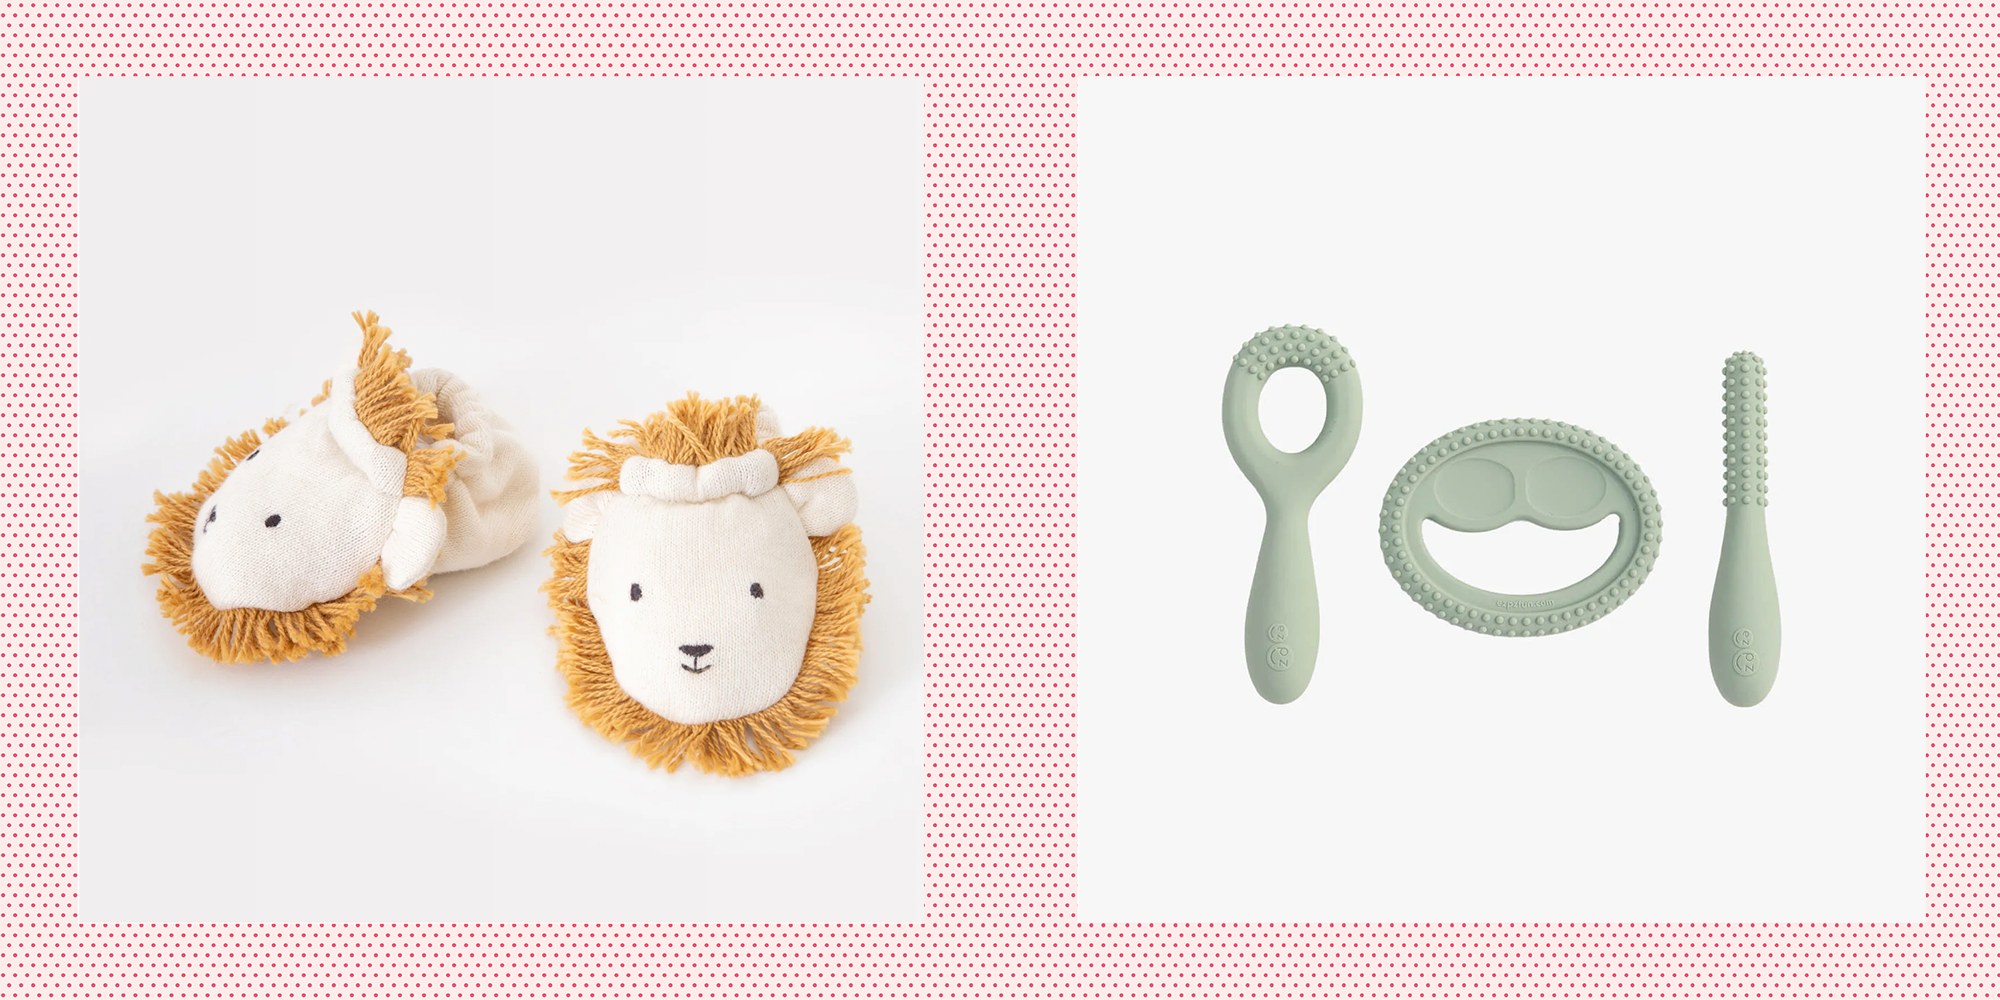 10 Gift Ideas for a New Mom That Are Beyond Spa Vouchers and Baby Toys